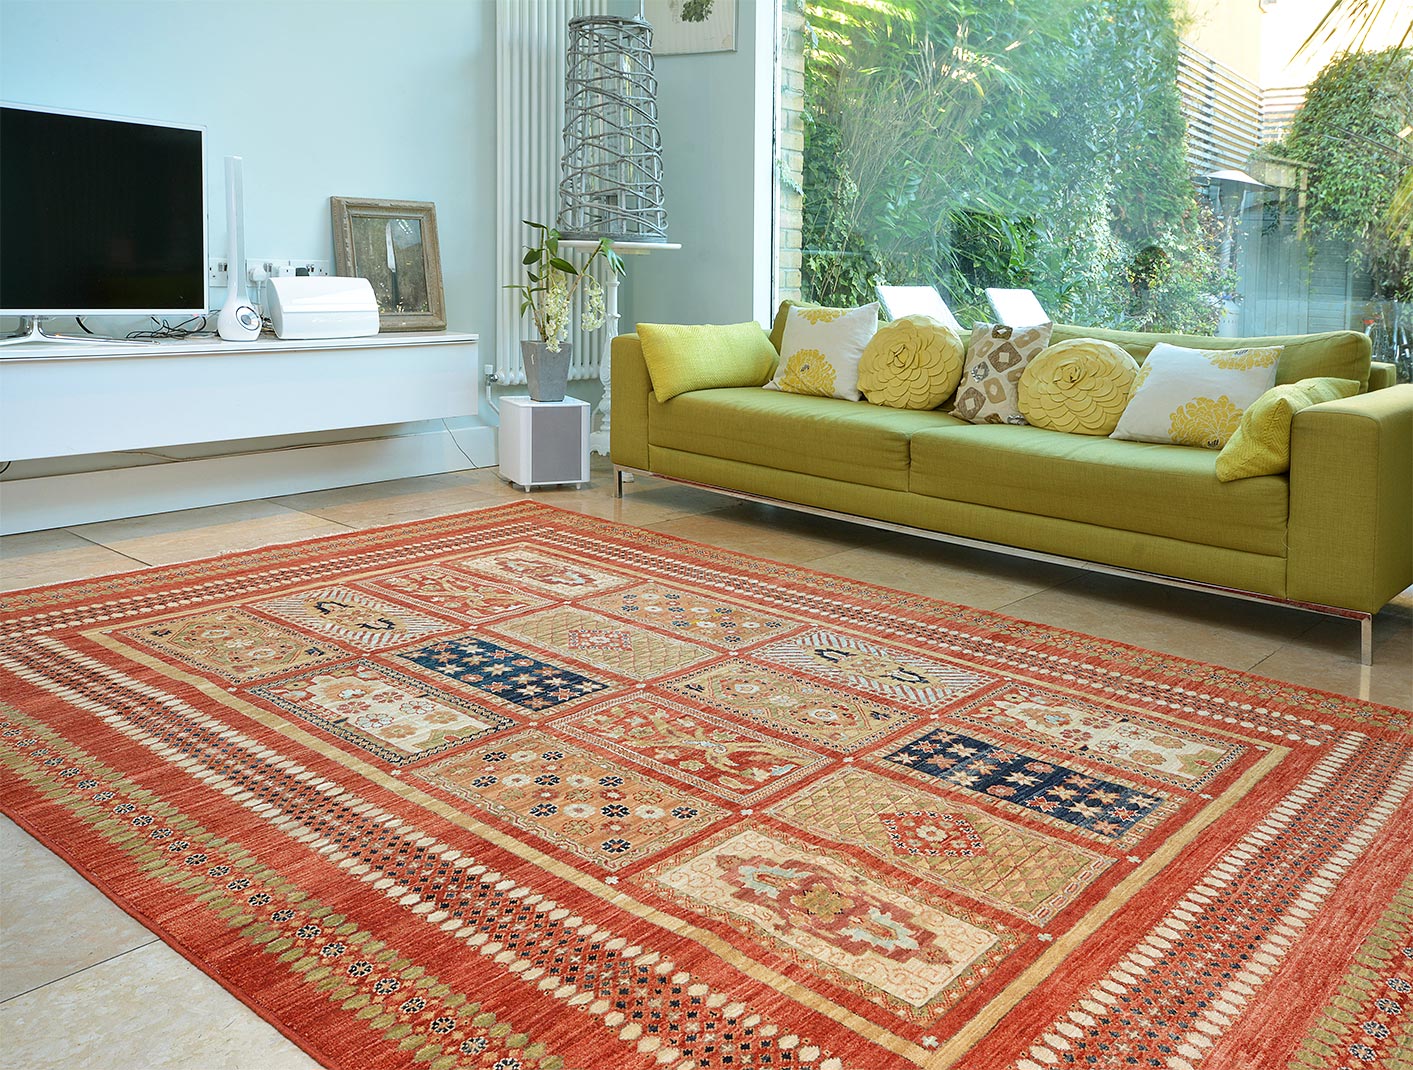 Home Decorating With Rugs Carpets And Rugs Retailers